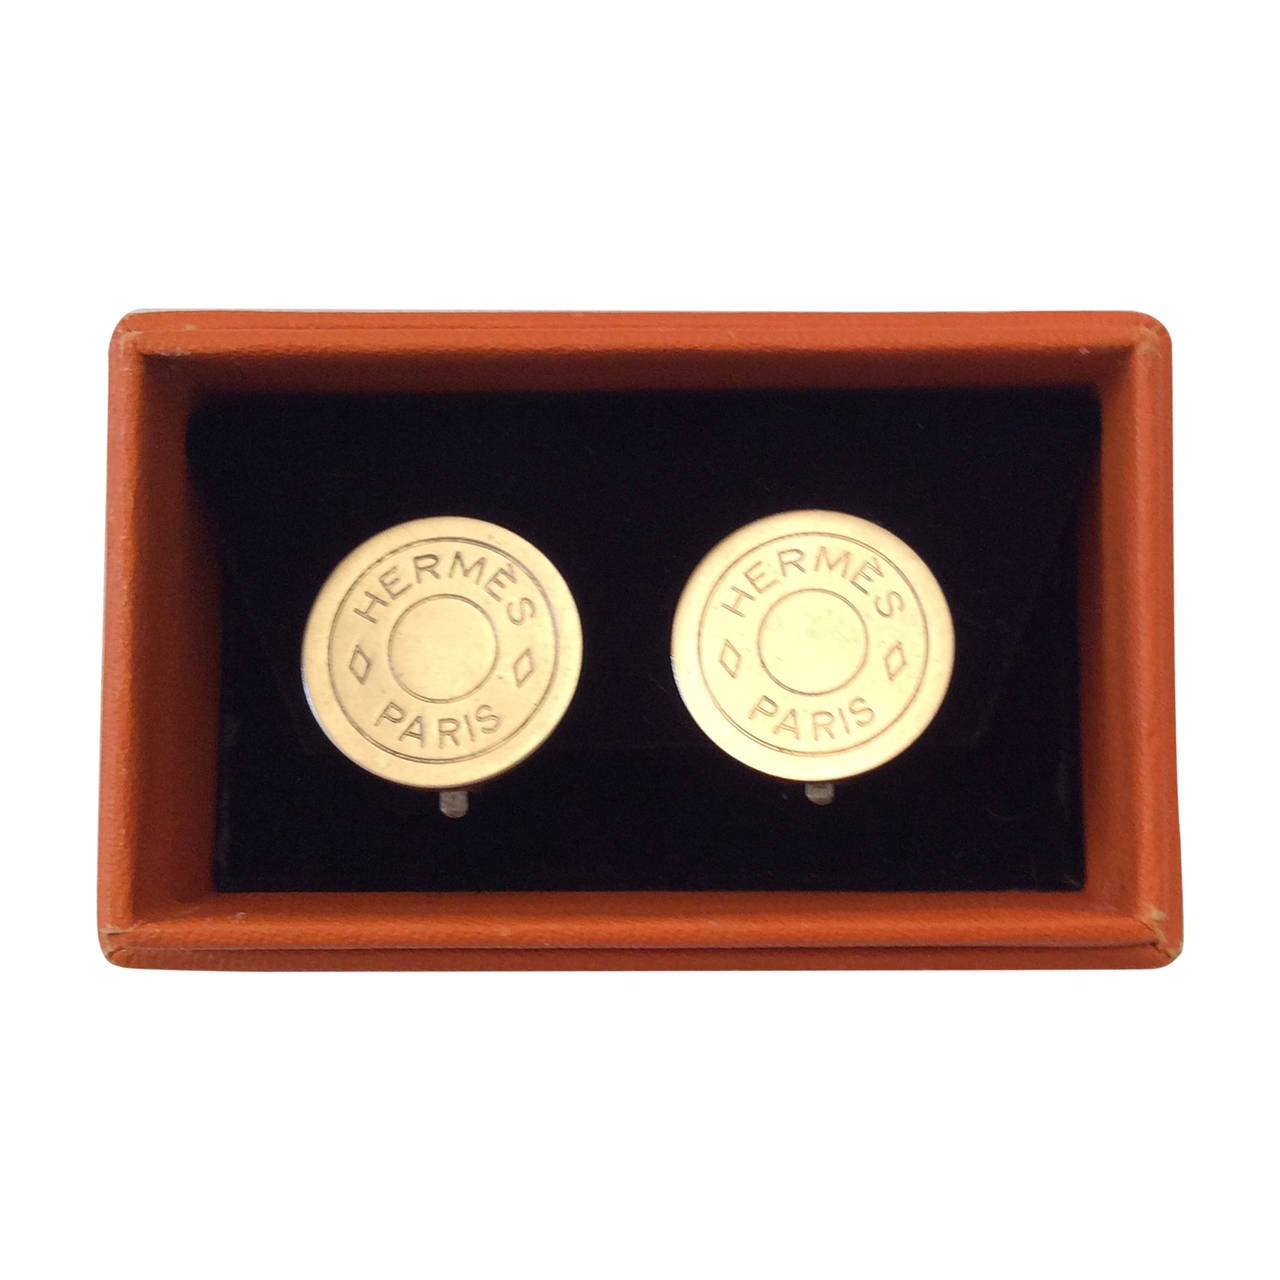 Hermes Earrings Classic Brushed  Silver/Tone Clips